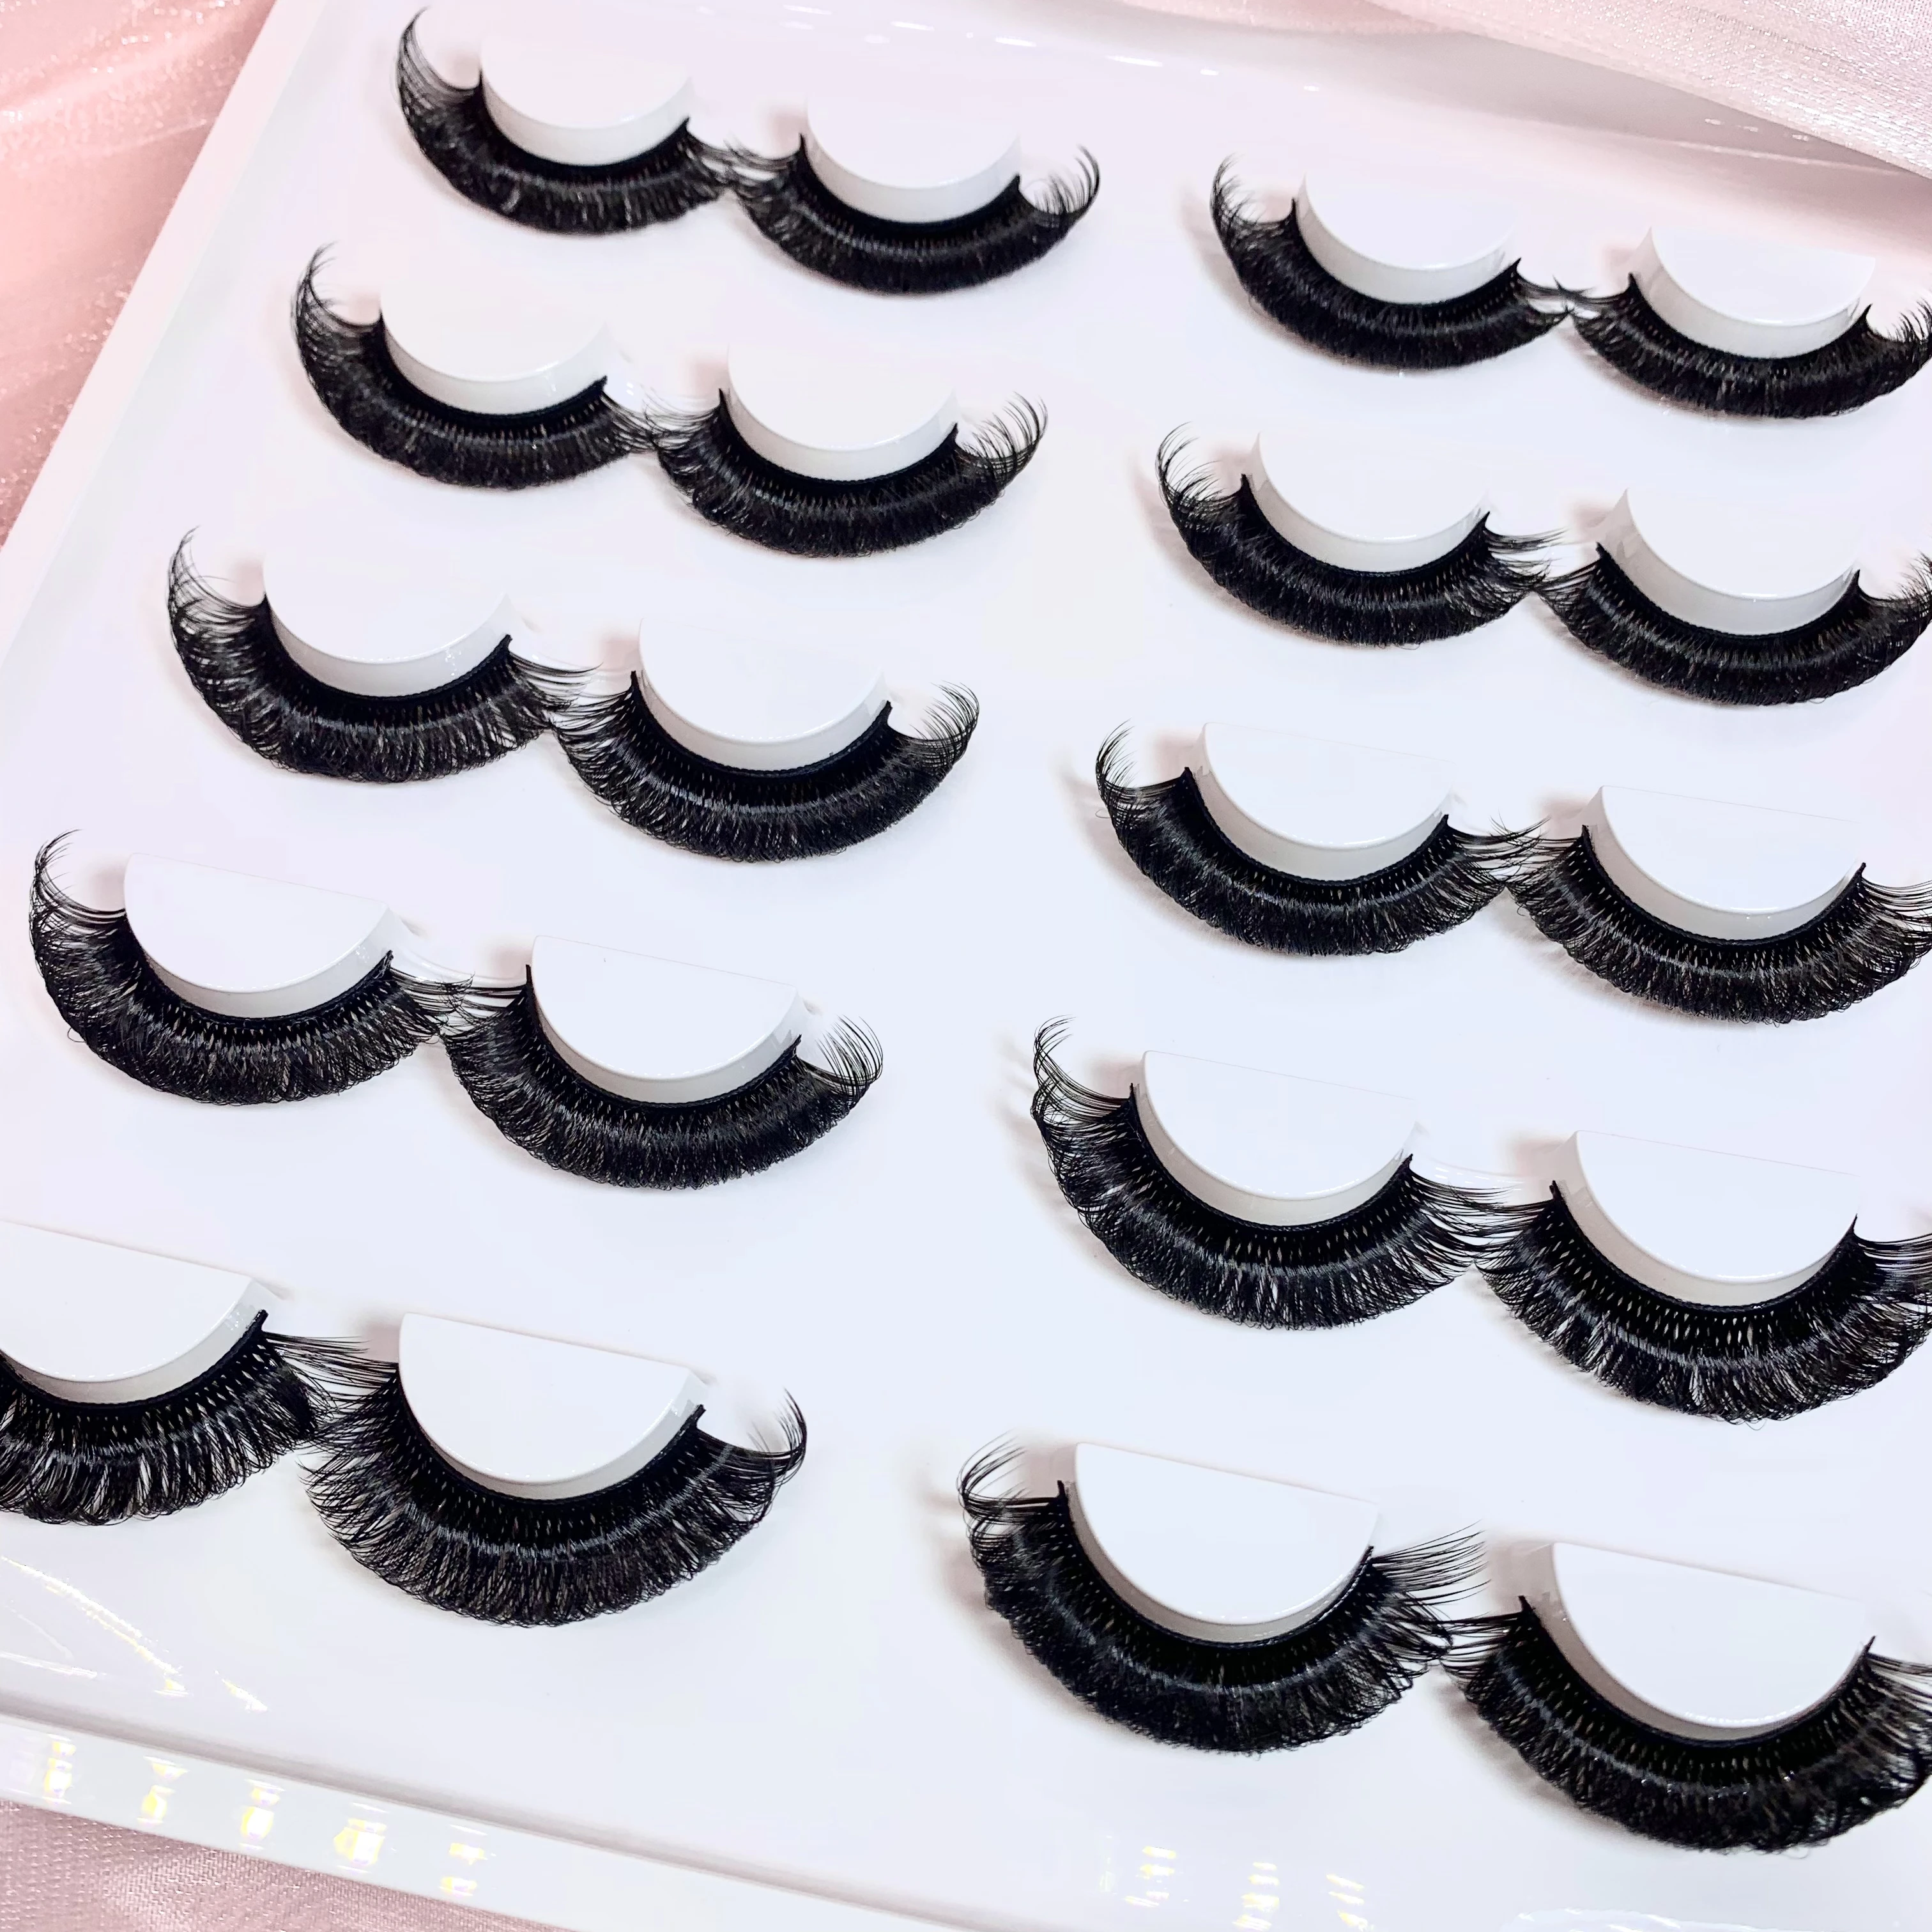 

10 Pairs DD Curl Russian Strip Lashes Fluffy Volume False Eyelashes DD Curl Dramatic Messy Faux Mink Fake Lashes Make Up